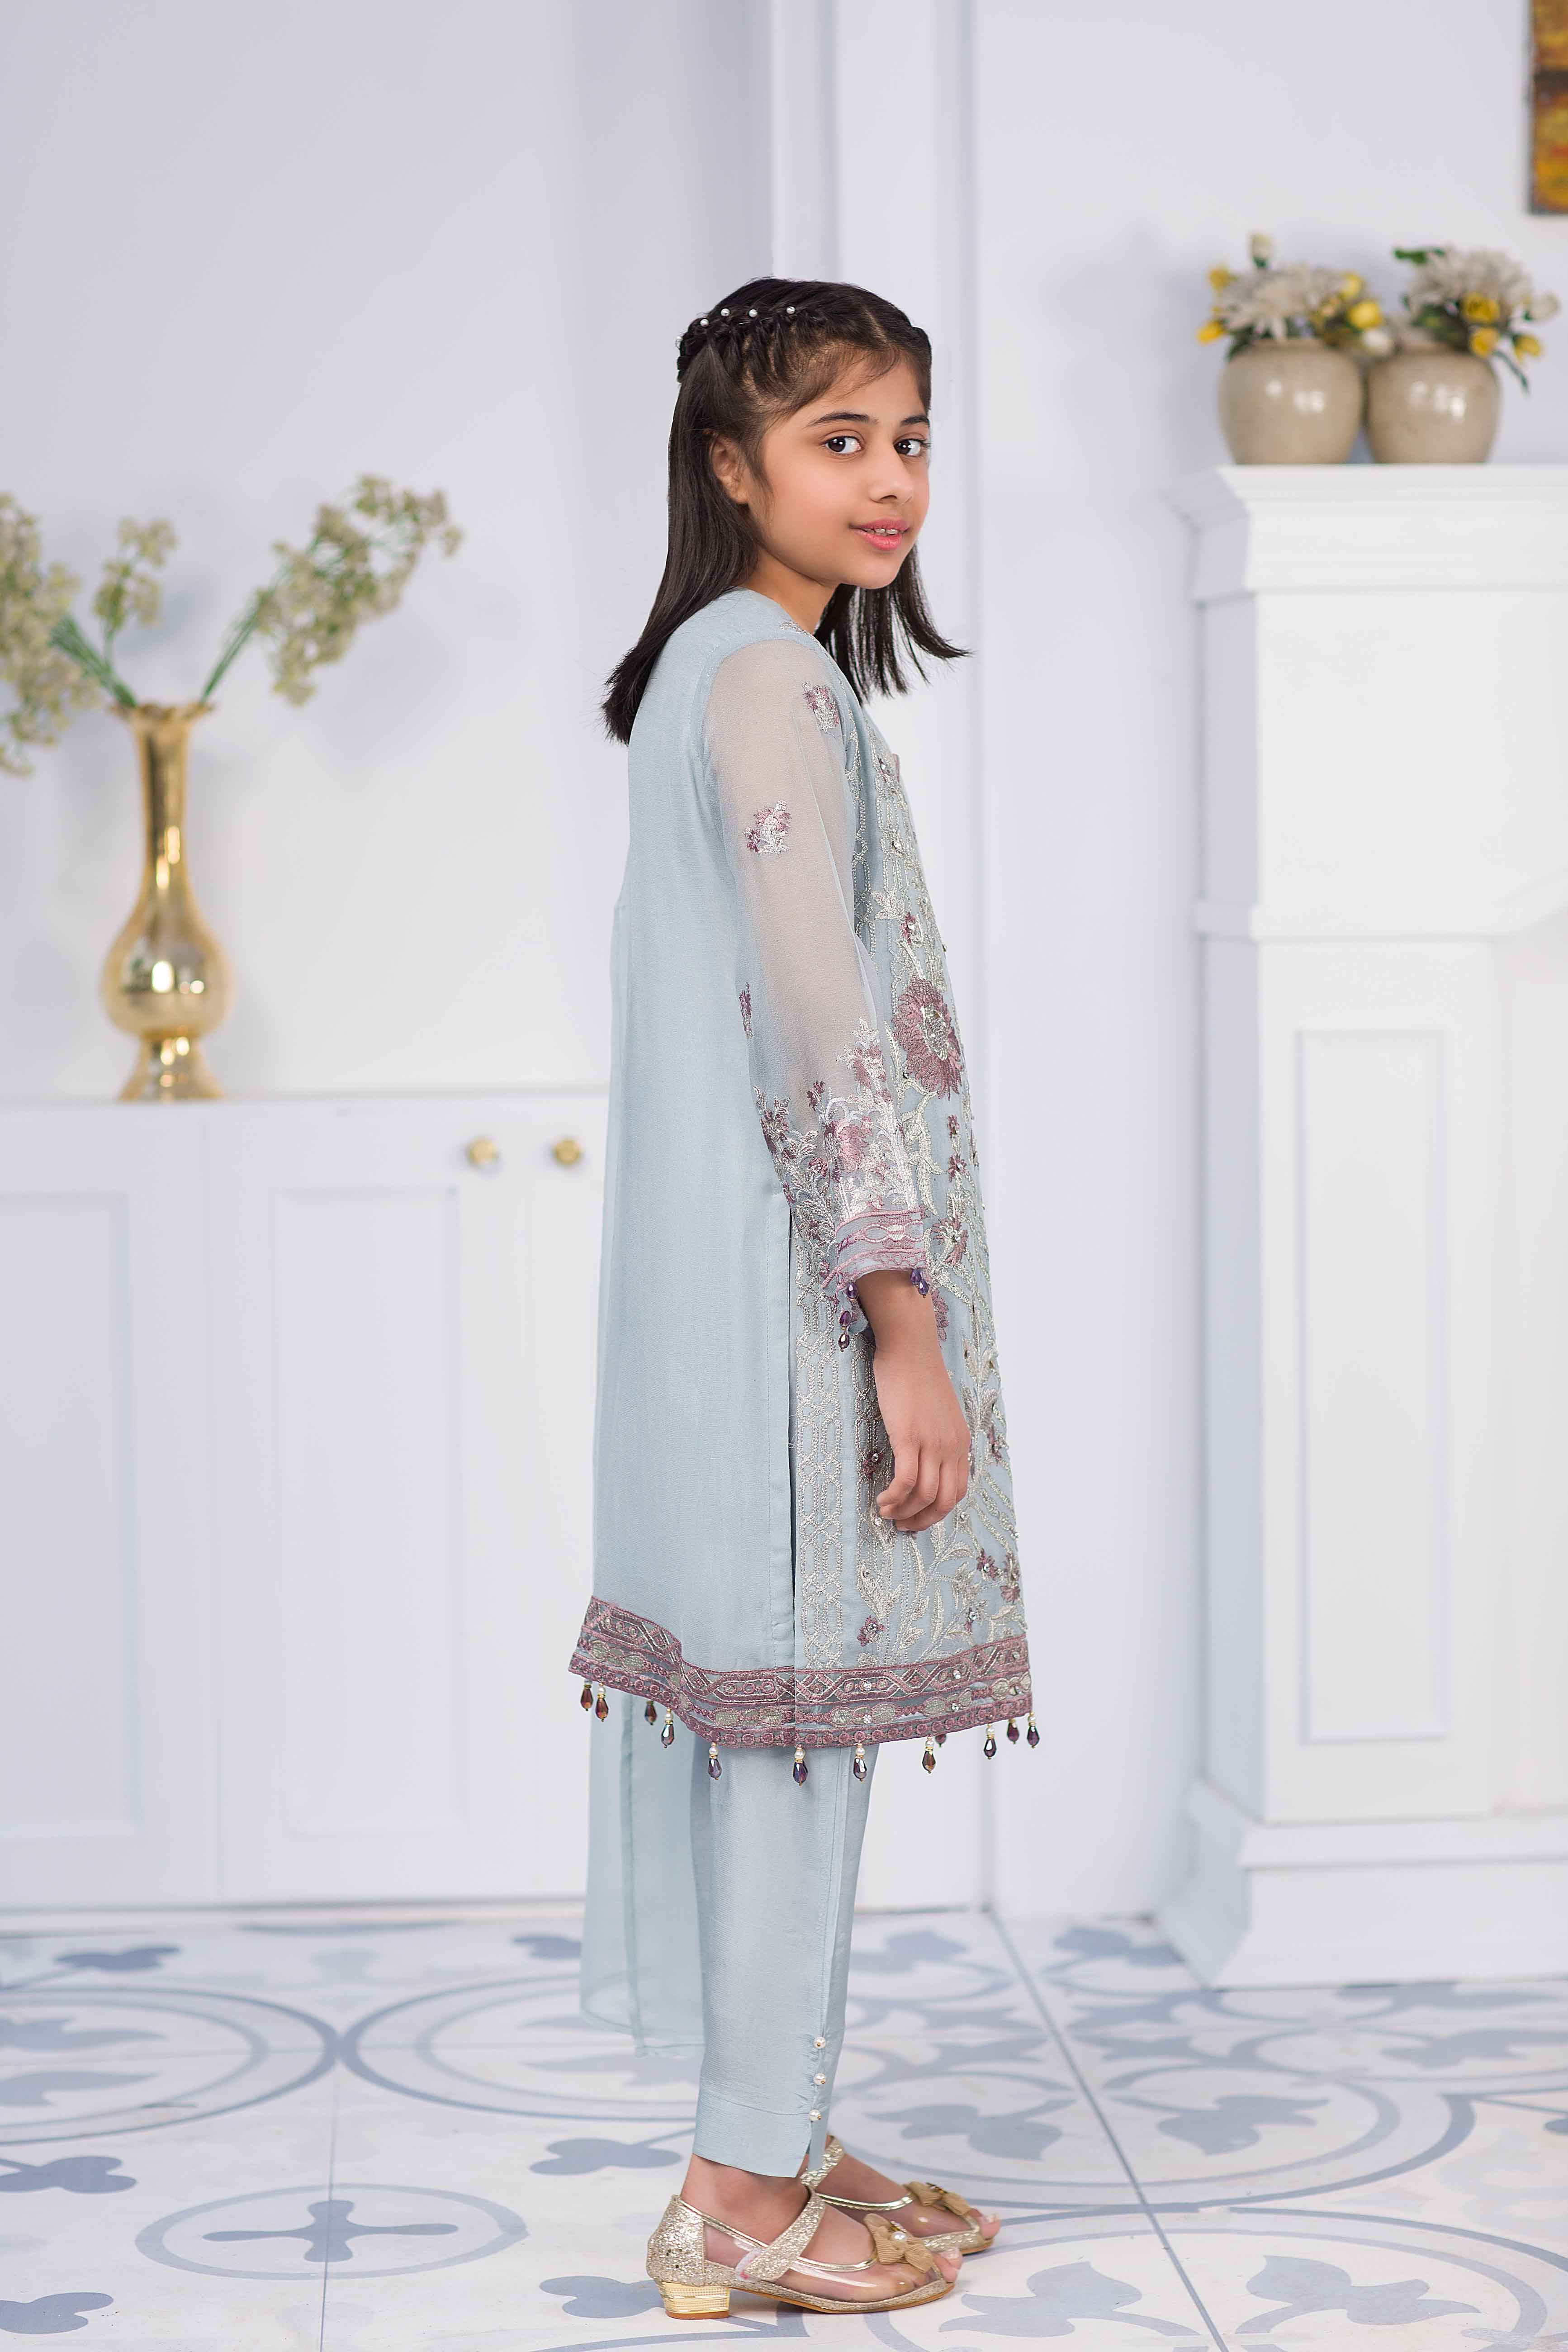 Simran Girls Mother & Daughter Eid Outfit with Embroidered Dupatta - Desi Posh